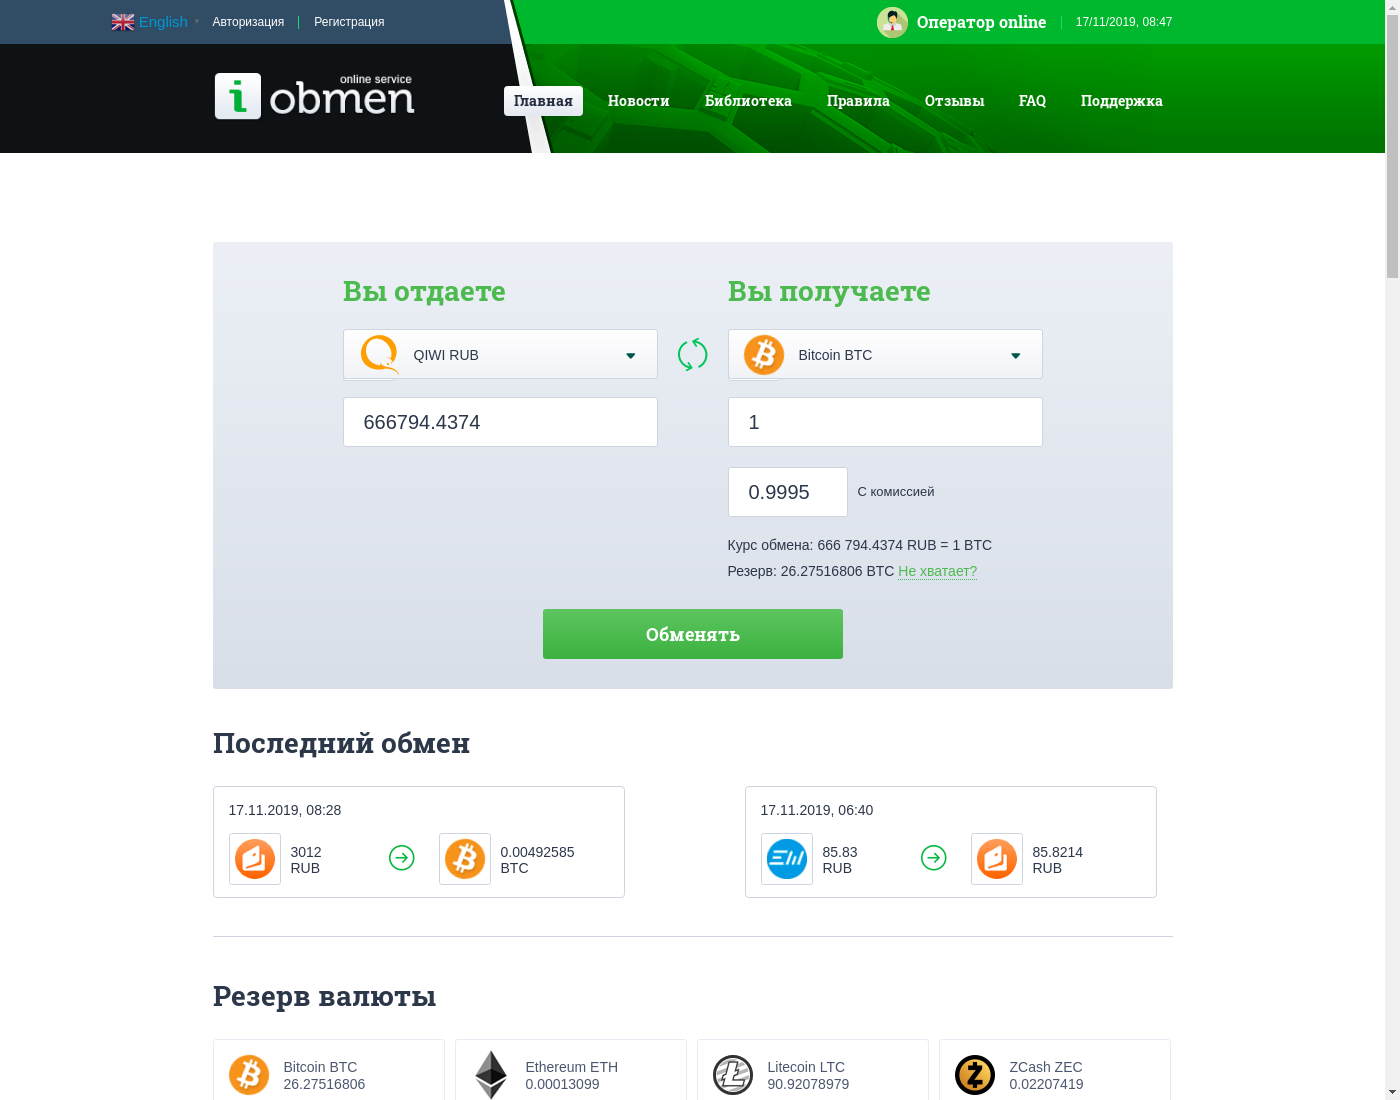 i-obmen user interface: the home page in English